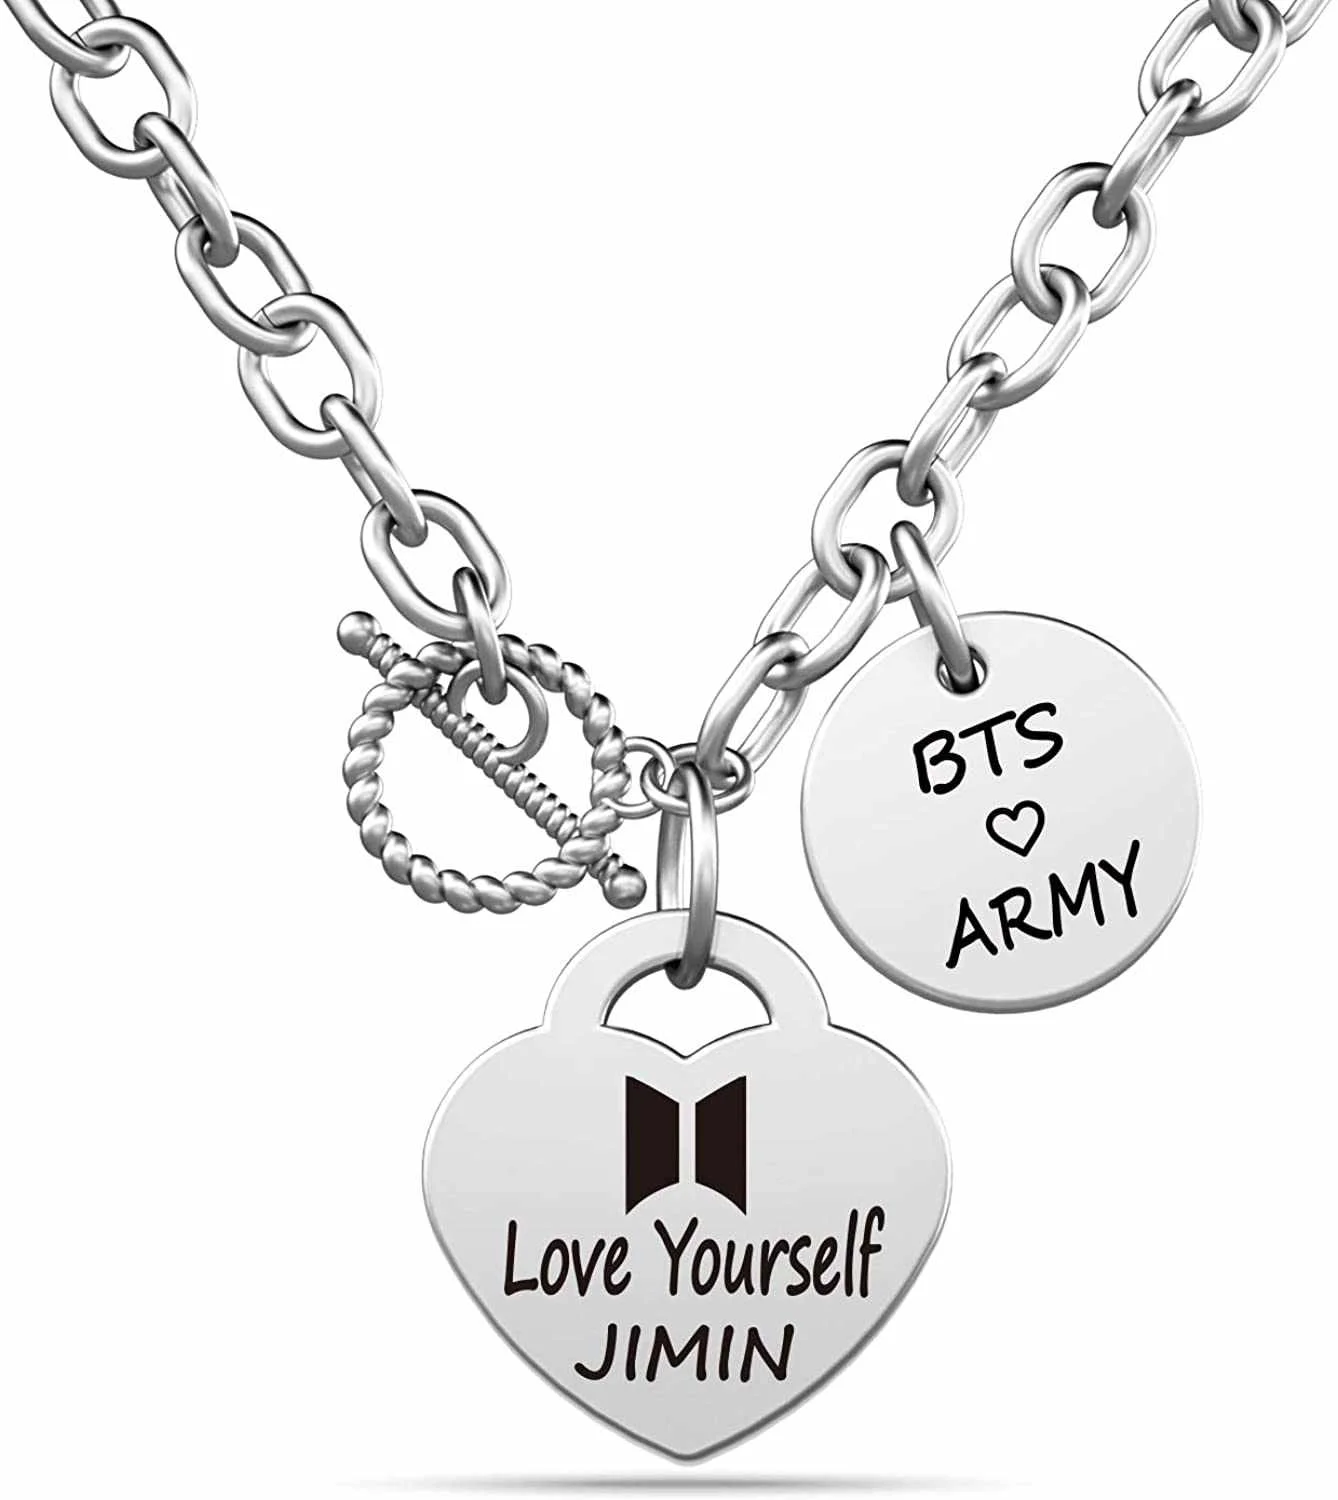 

Bangtan Necklace Bts Army Jewelry To Yourself Army Bts Necklace For Girls Kpop